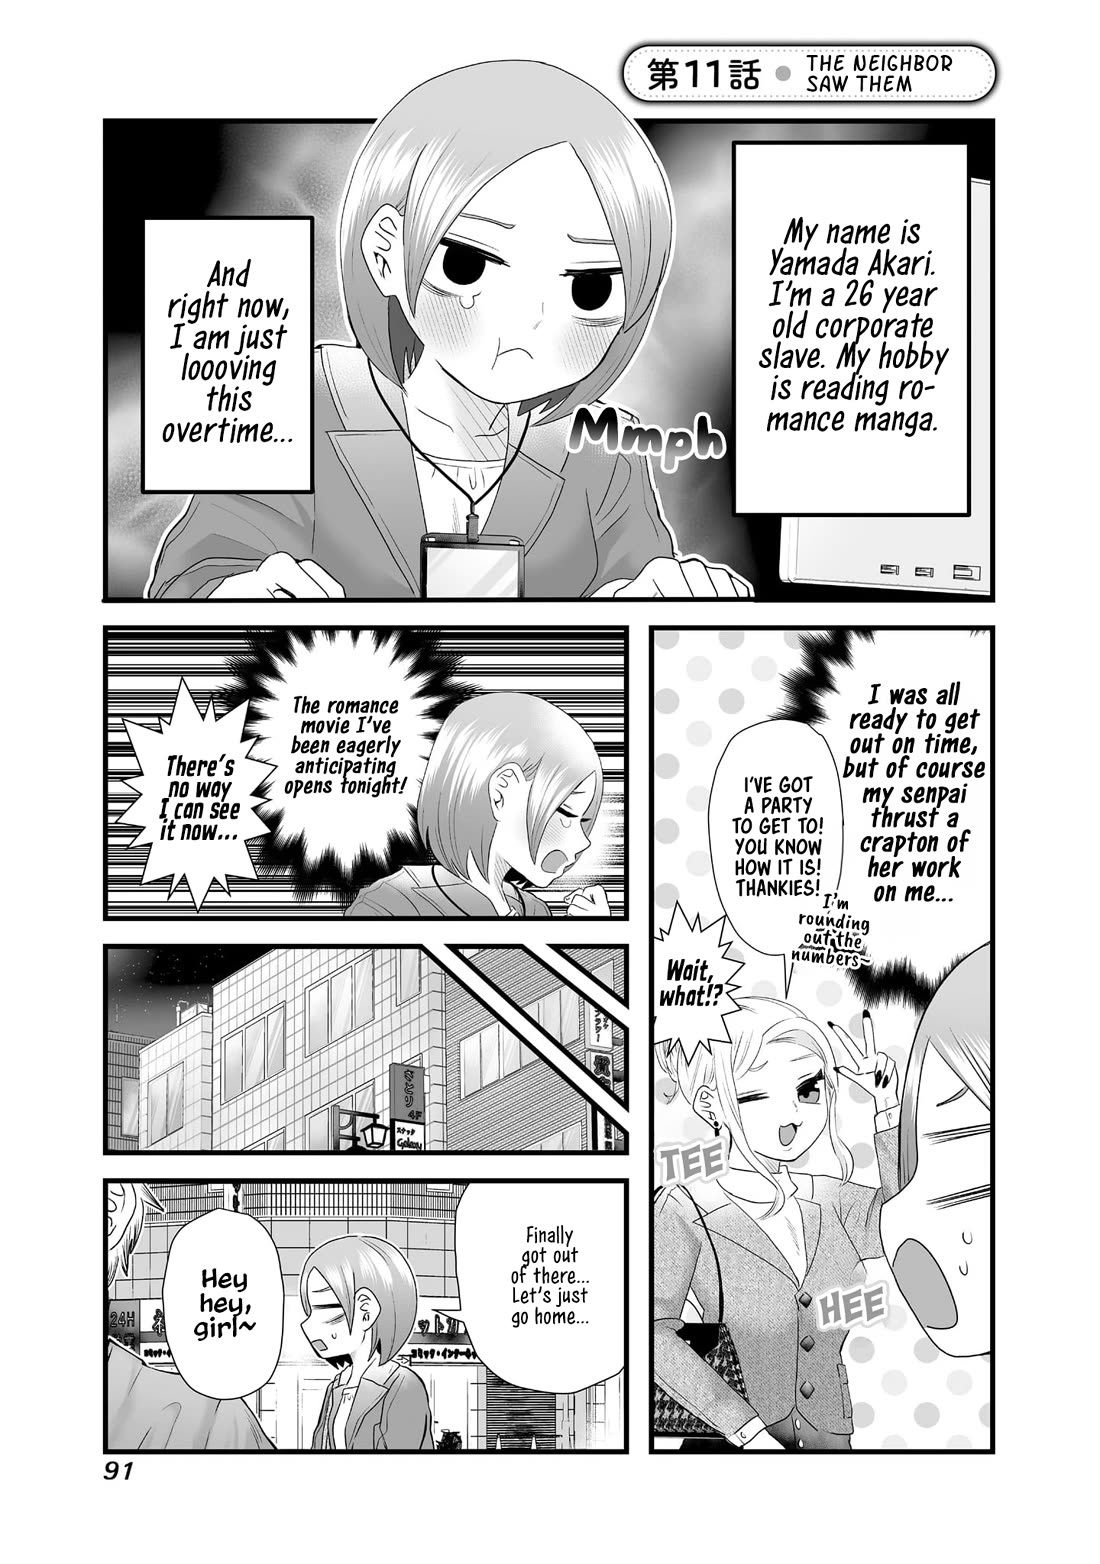 Sacchan and Ken-chan Are Going at it Again - chapter 11 - #1